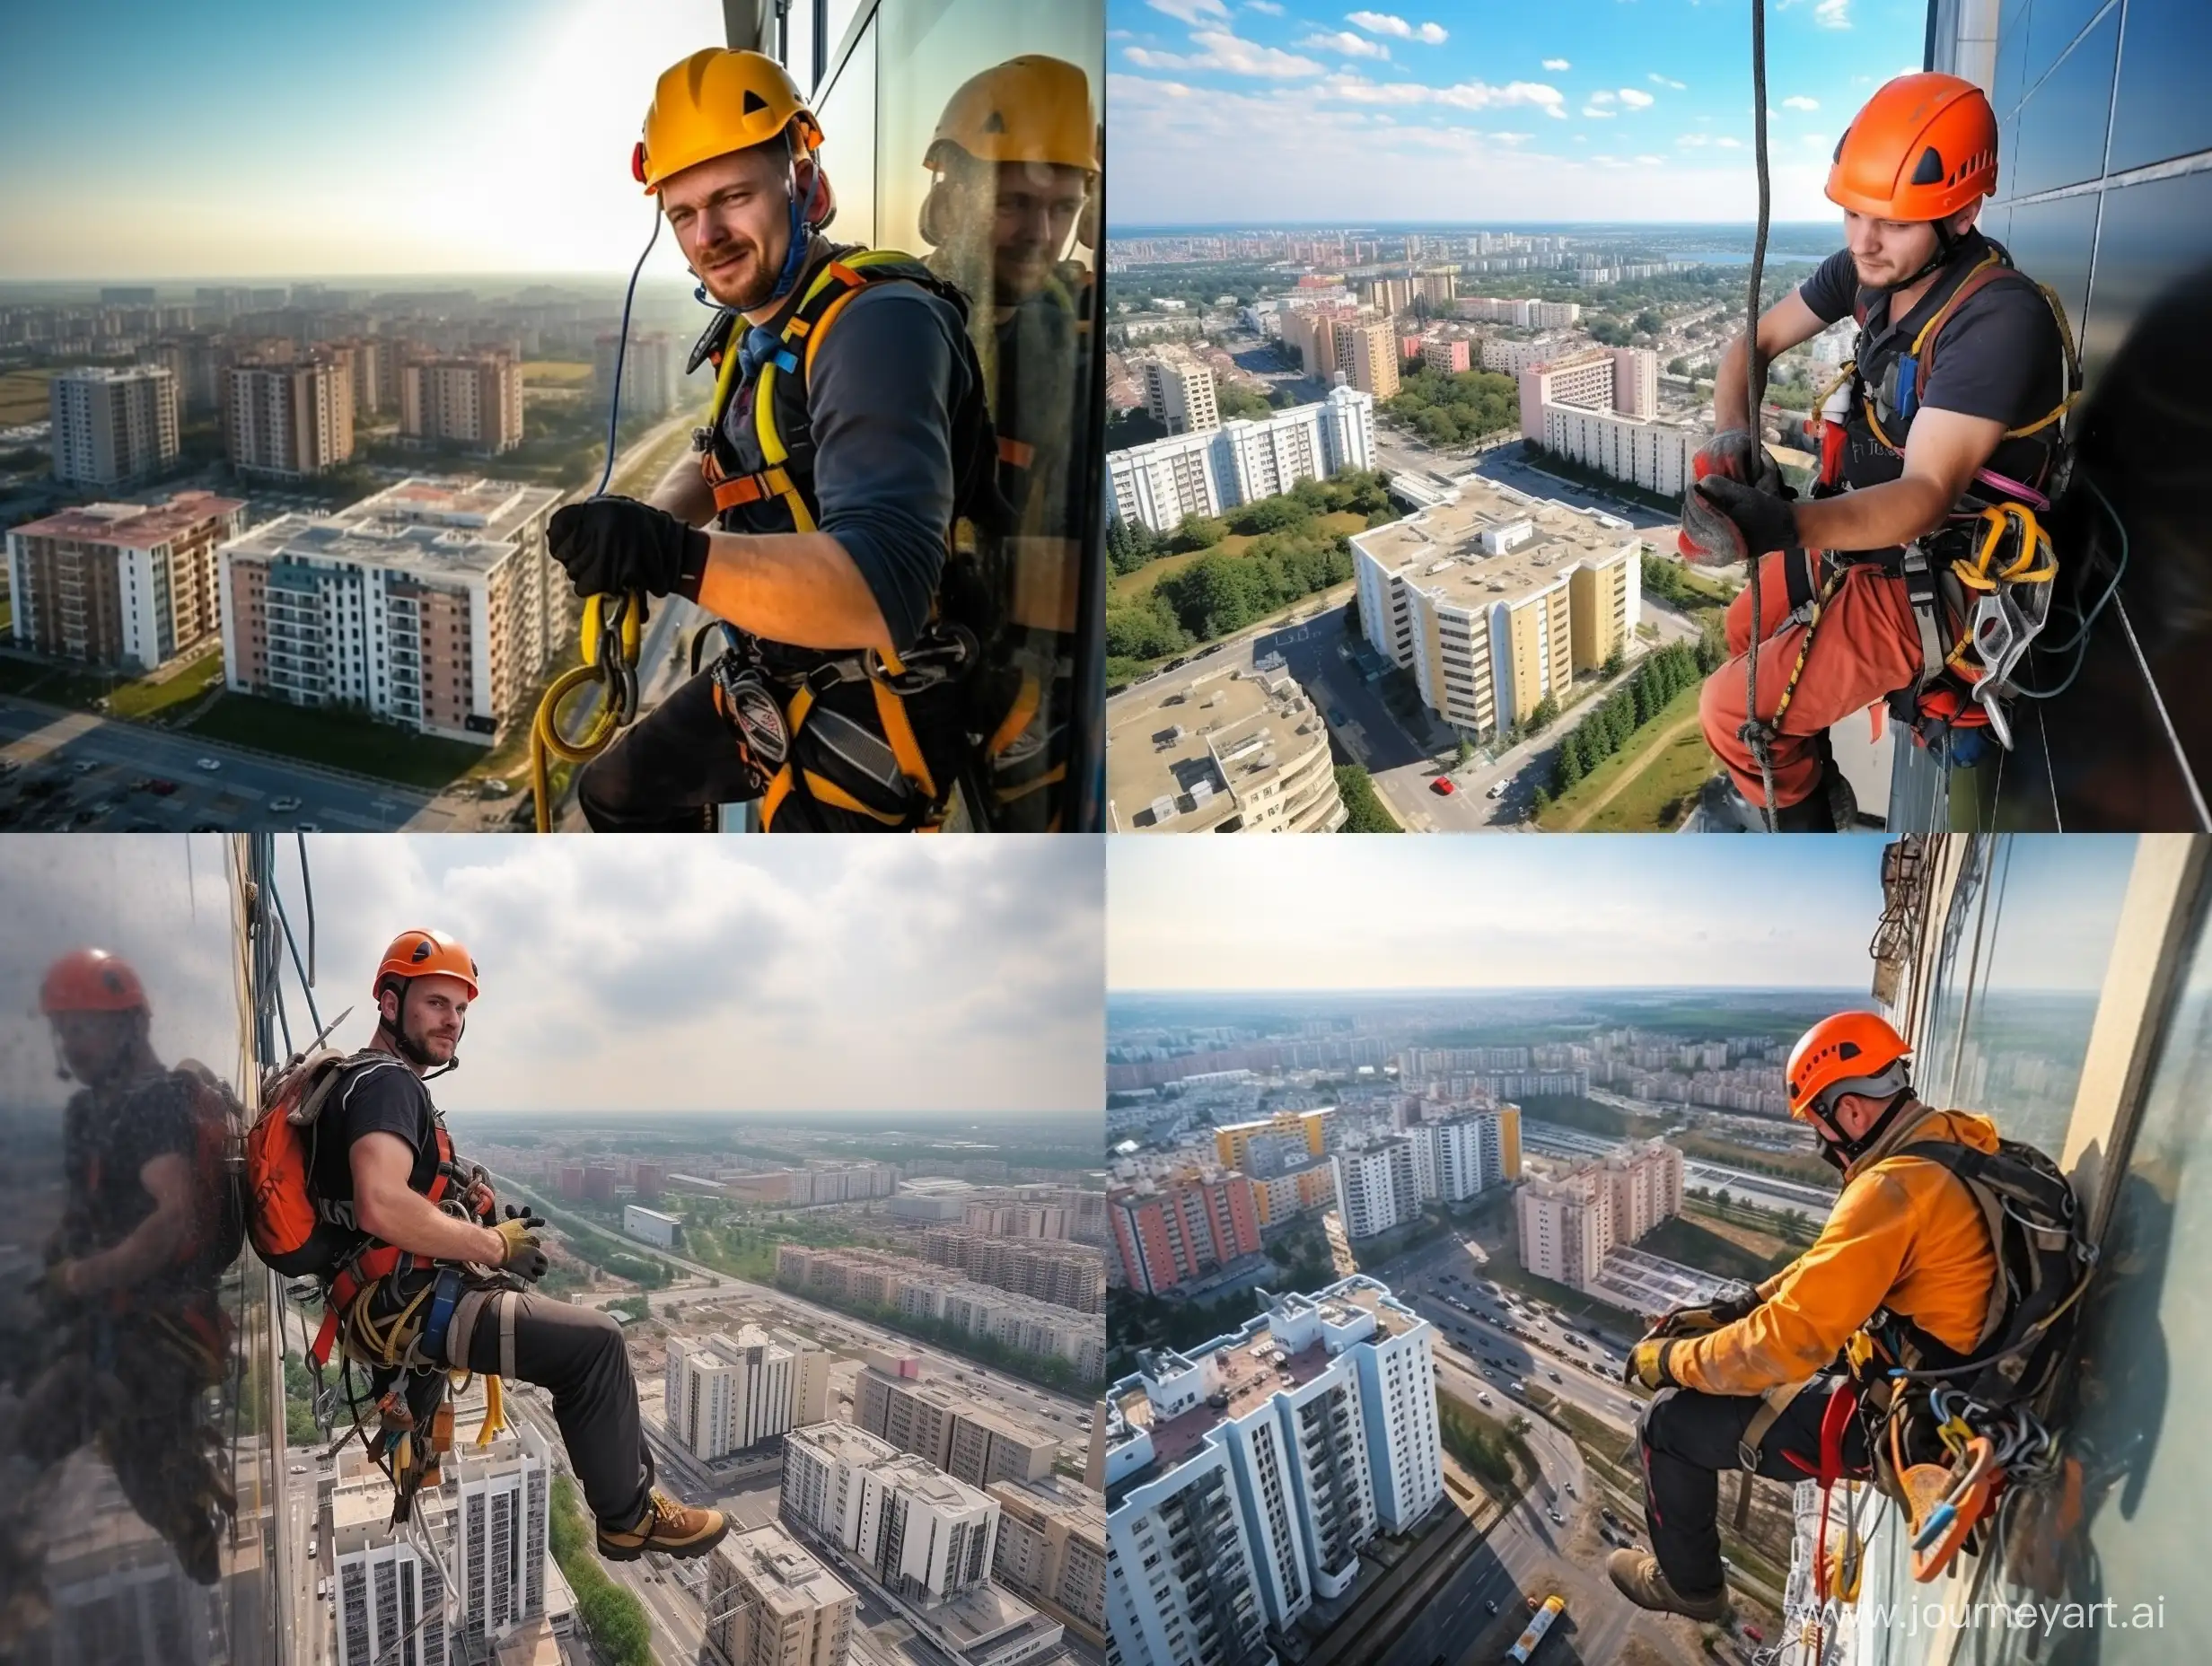 Urban-Window-Cleaning-Professional-Climber-with-Petzl-Equipment-at-Lakhta-Center